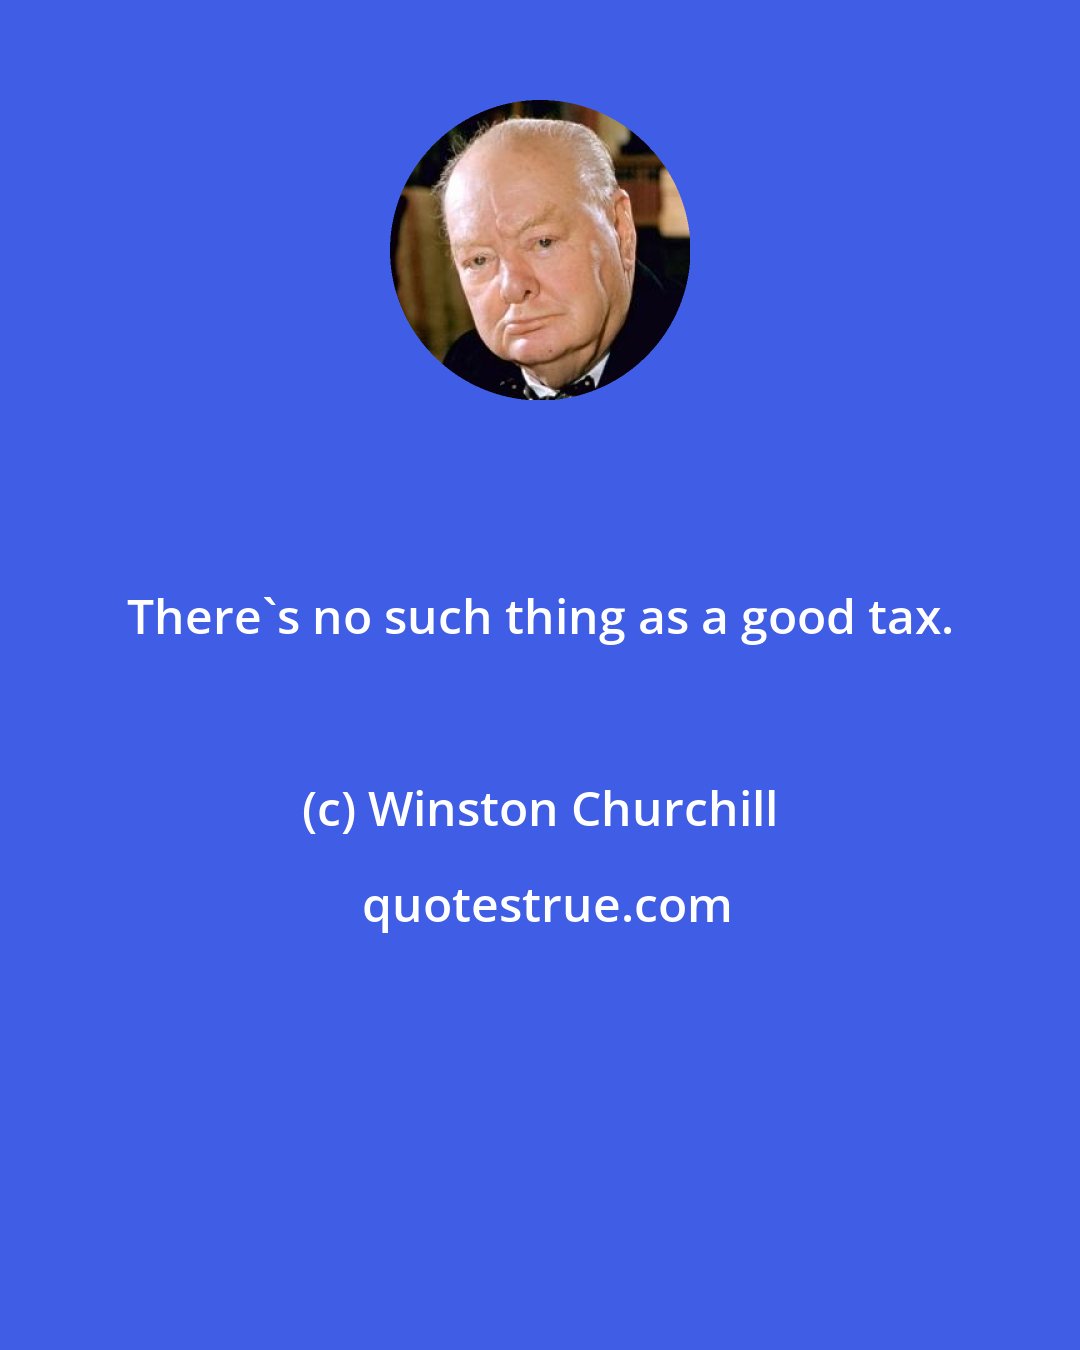 Winston Churchill: There's no such thing as a good tax.